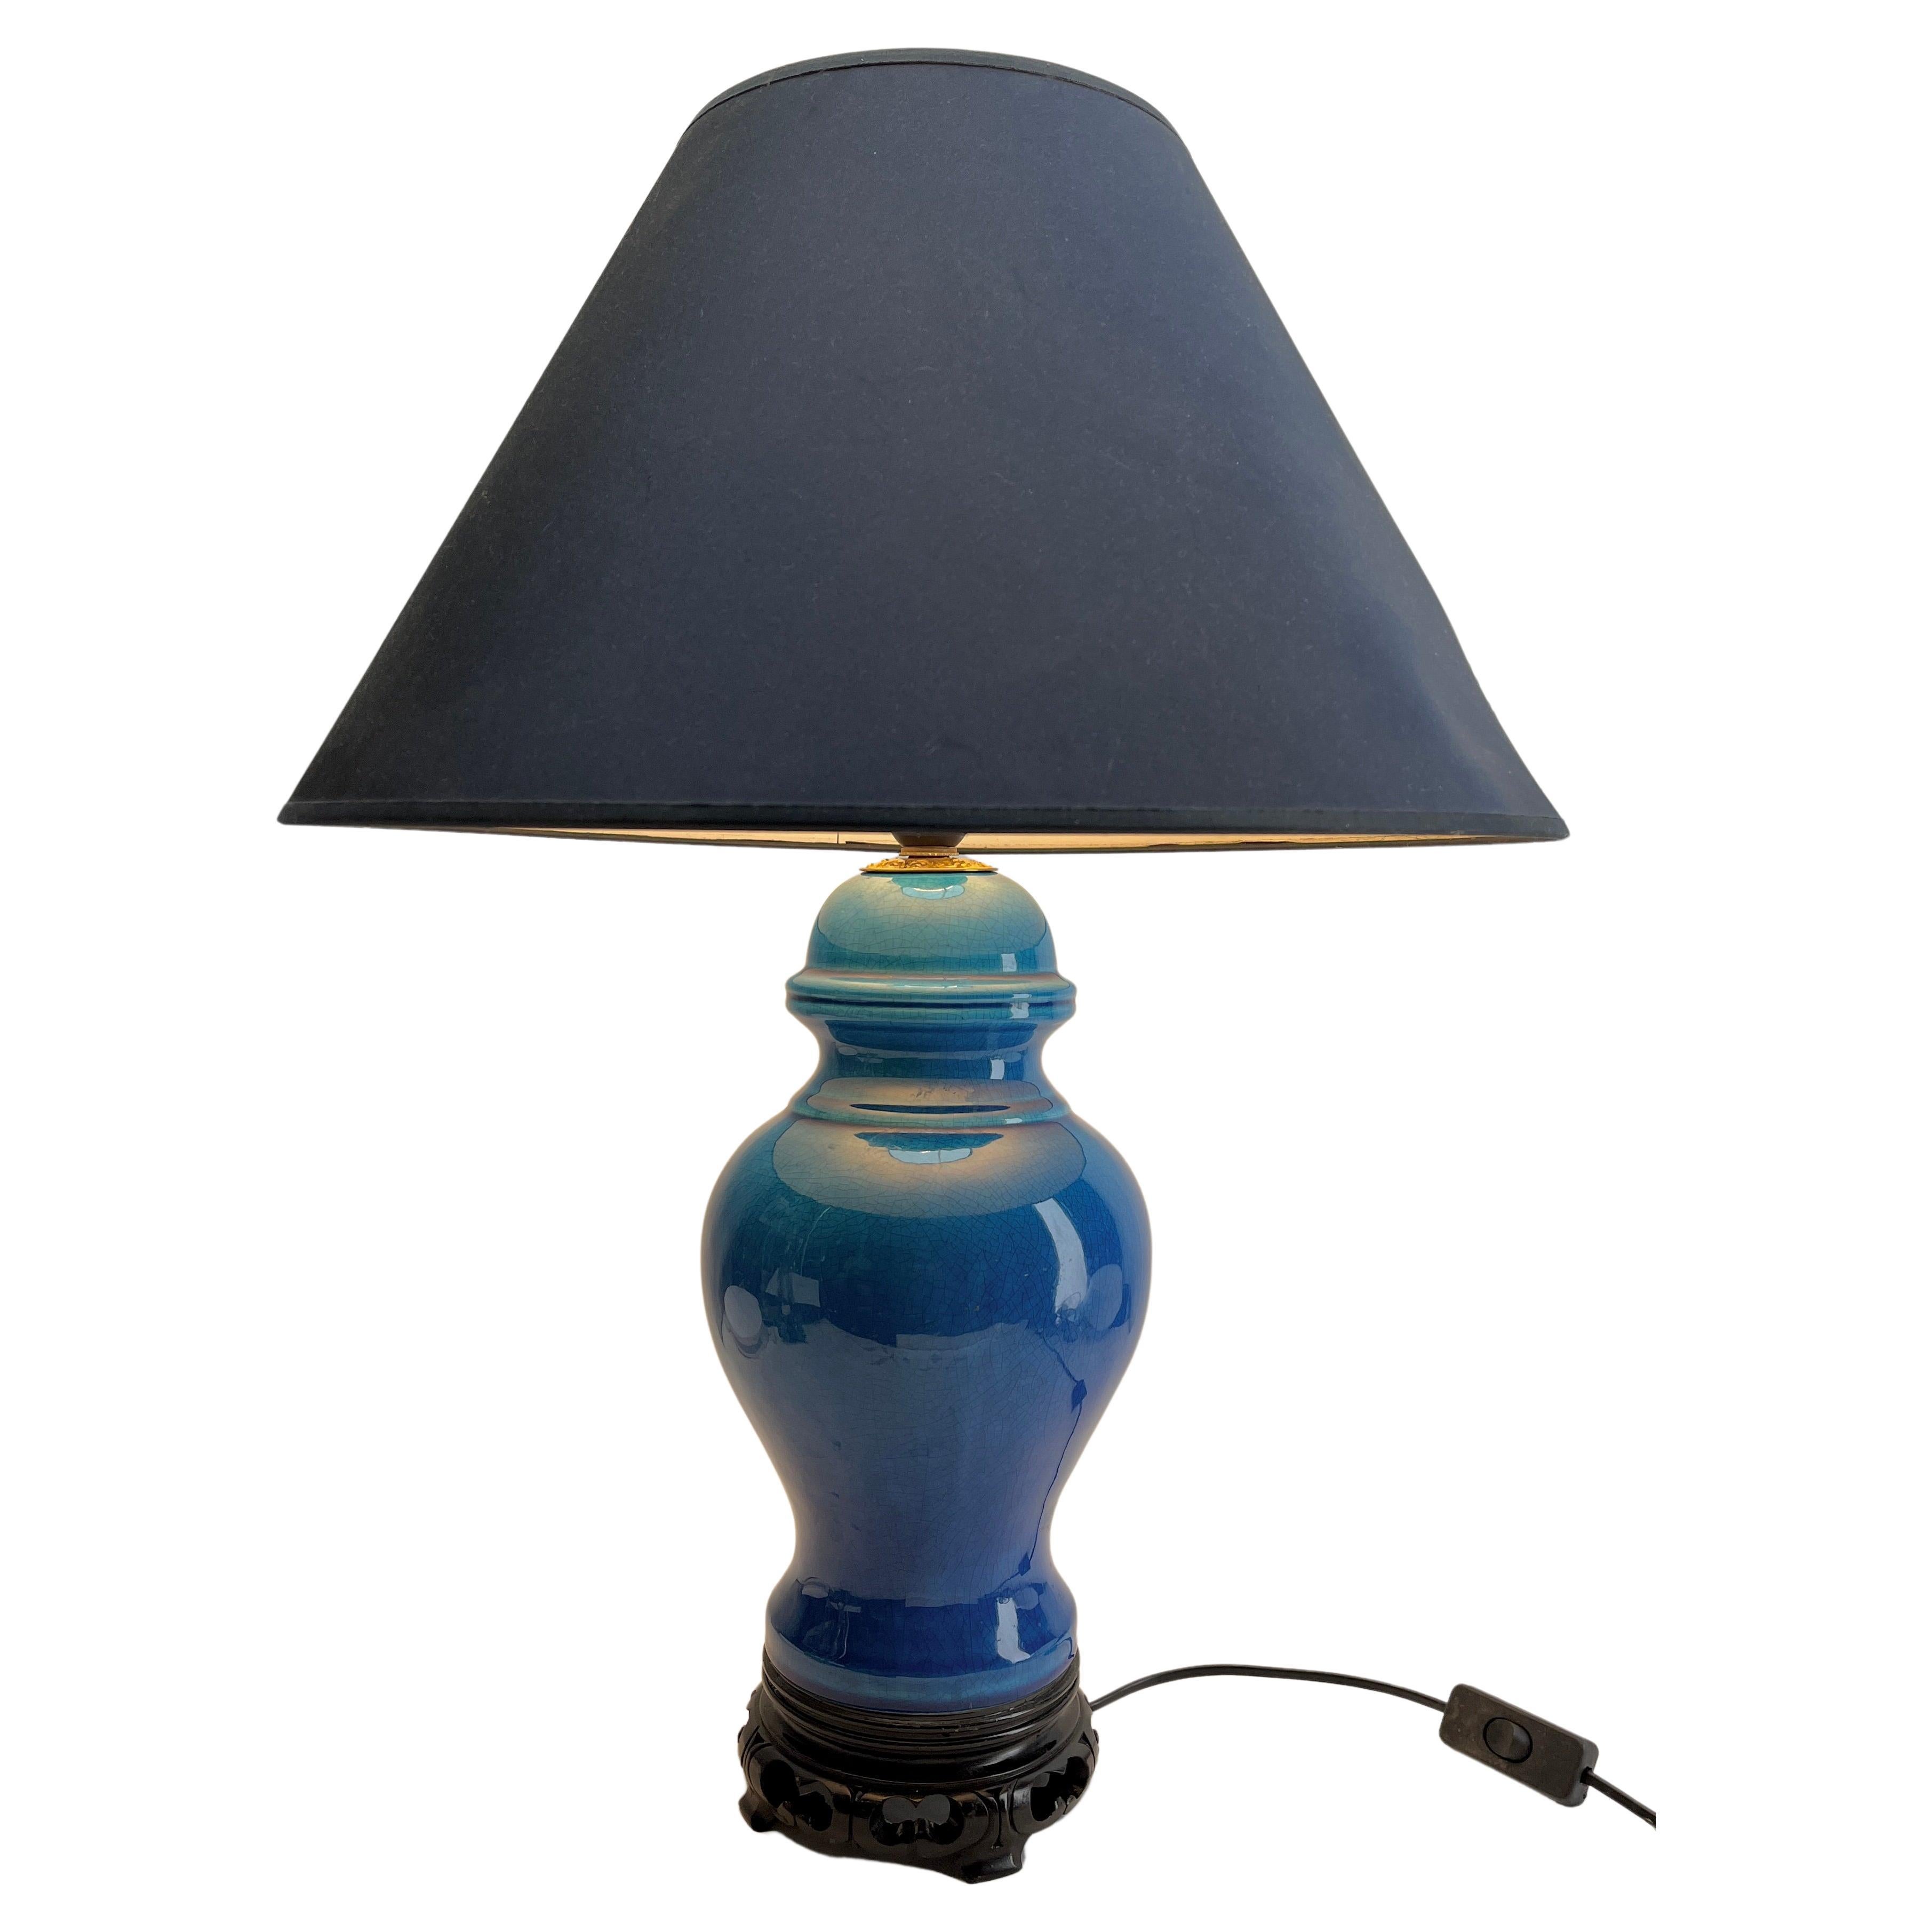 Mid-20th Century Turquoise Glazed  Chinese Ceramic Table Lamp with Crackle Glaze For Sale